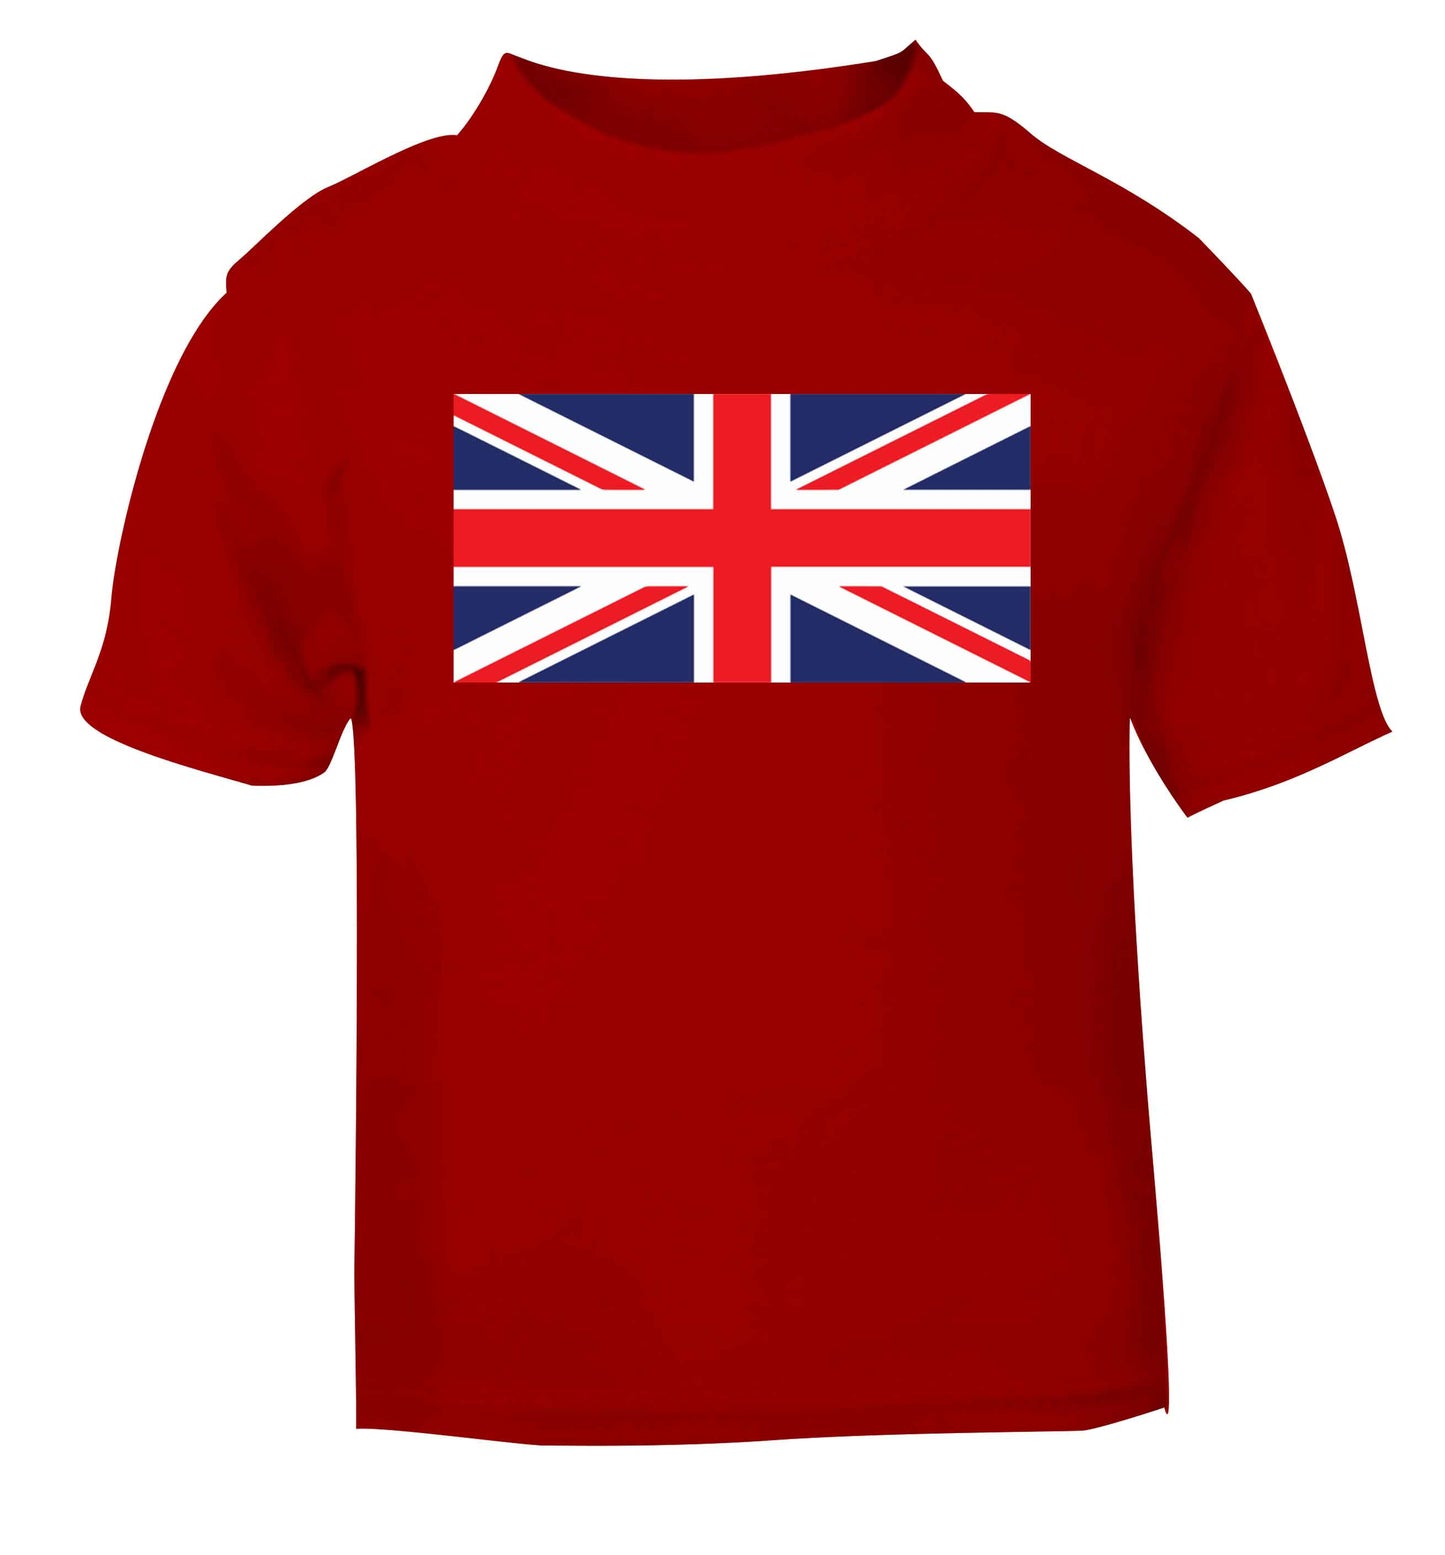 Union Jack red baby toddler Tshirt 2 Years